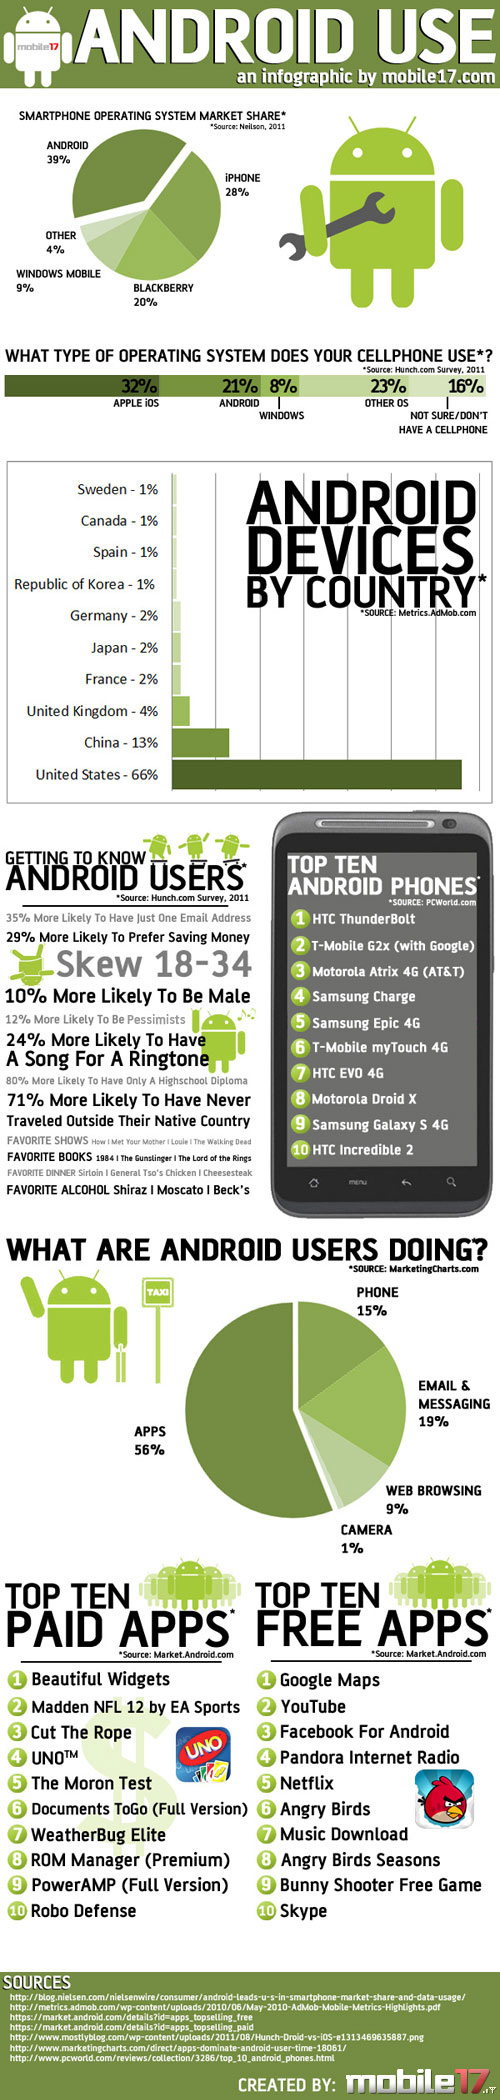 Android Use Infographic